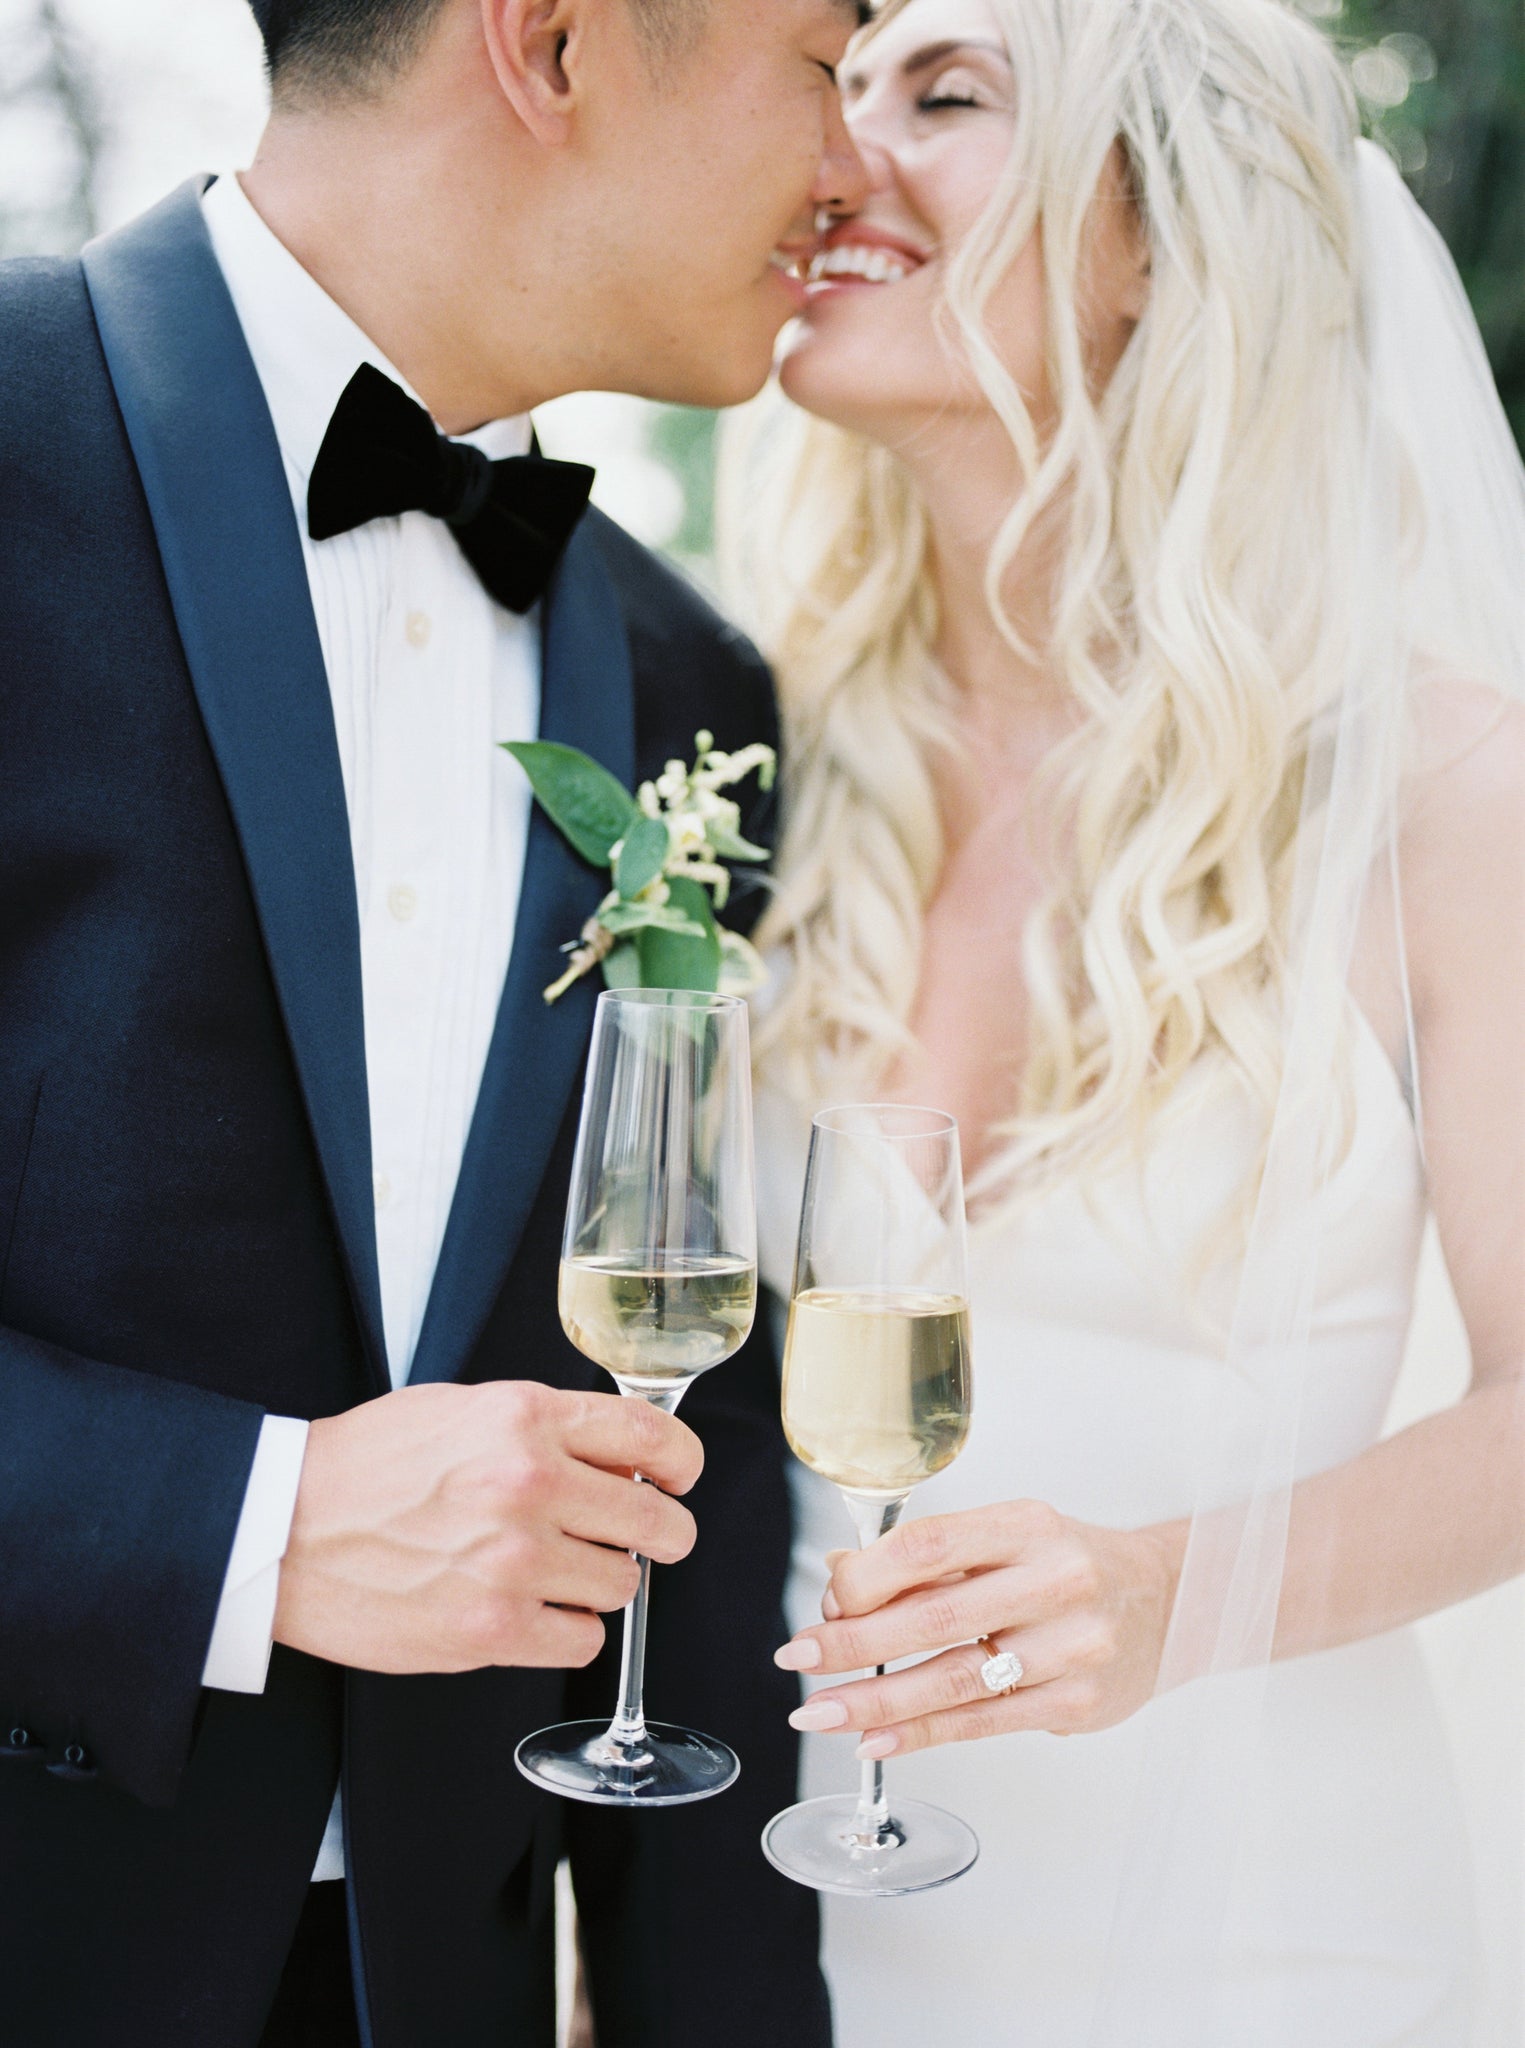 Katie Dean Jewelry romantic destination wedding at a chateau, Provence, France, bride and groom